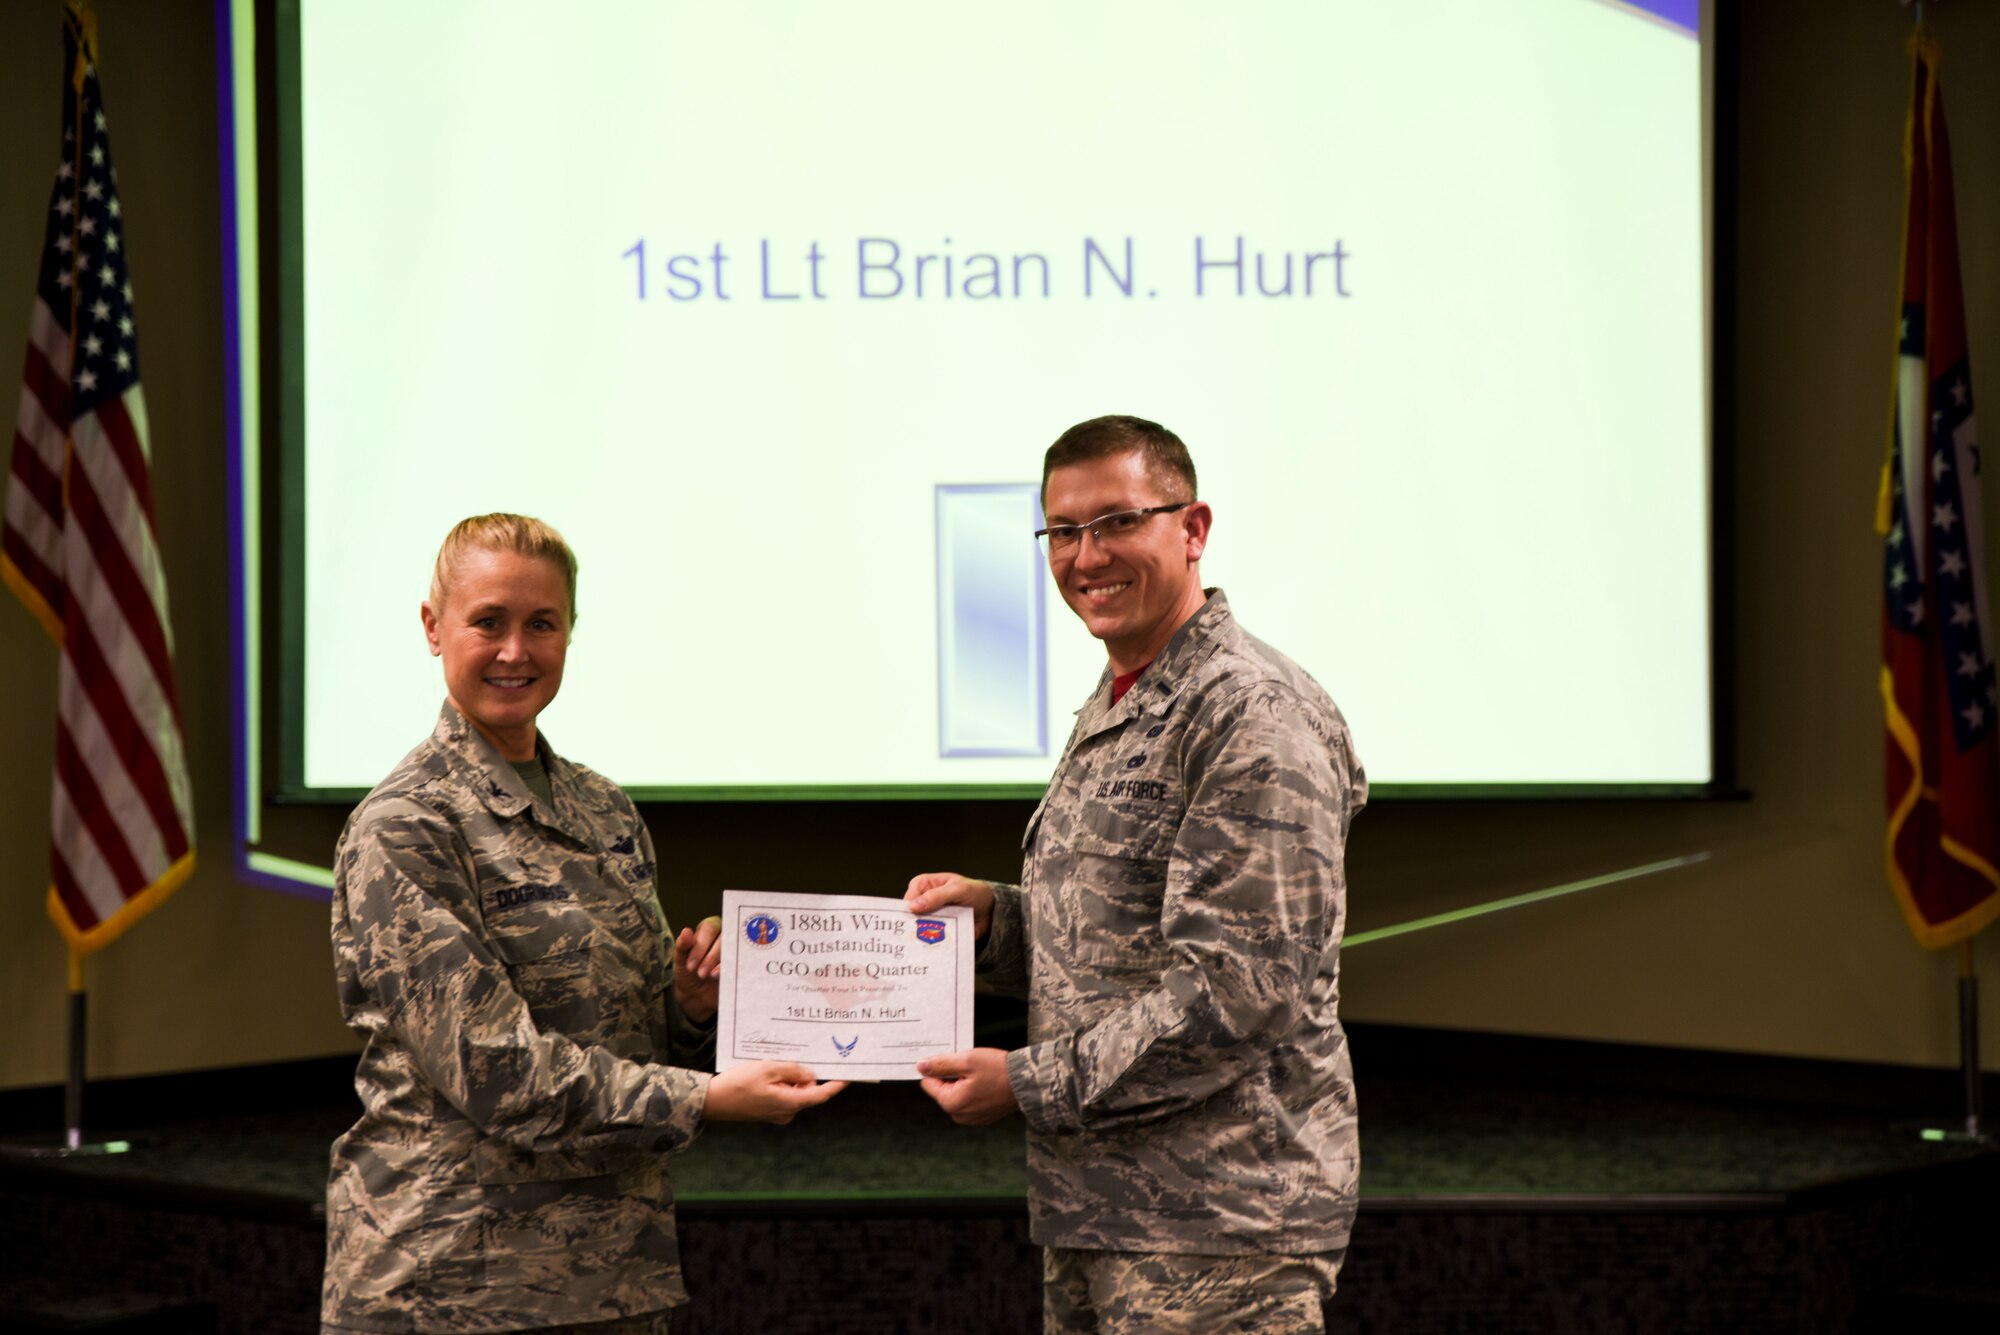 1st Lt. Brian Hurt is presented the certificate for his selection as the Company Grade Officer of the Quarter by Col. Bobbi Doorenbos, 188th Wing Commander, during a commander's call held Dec. 5, 2015. Nineteen Airmen of the Quarter nominees were recognized for their exceptional service to the wing during the last quarter that distinguished themselves among their peers in the 188th. Winners were selected in the Airman, Noncommissioned Officer, Senior NCO, Company Grade Officer and Field Grade Officer categories. (U.S. Air National Guard photo by Capt. Holli Nelson/released)